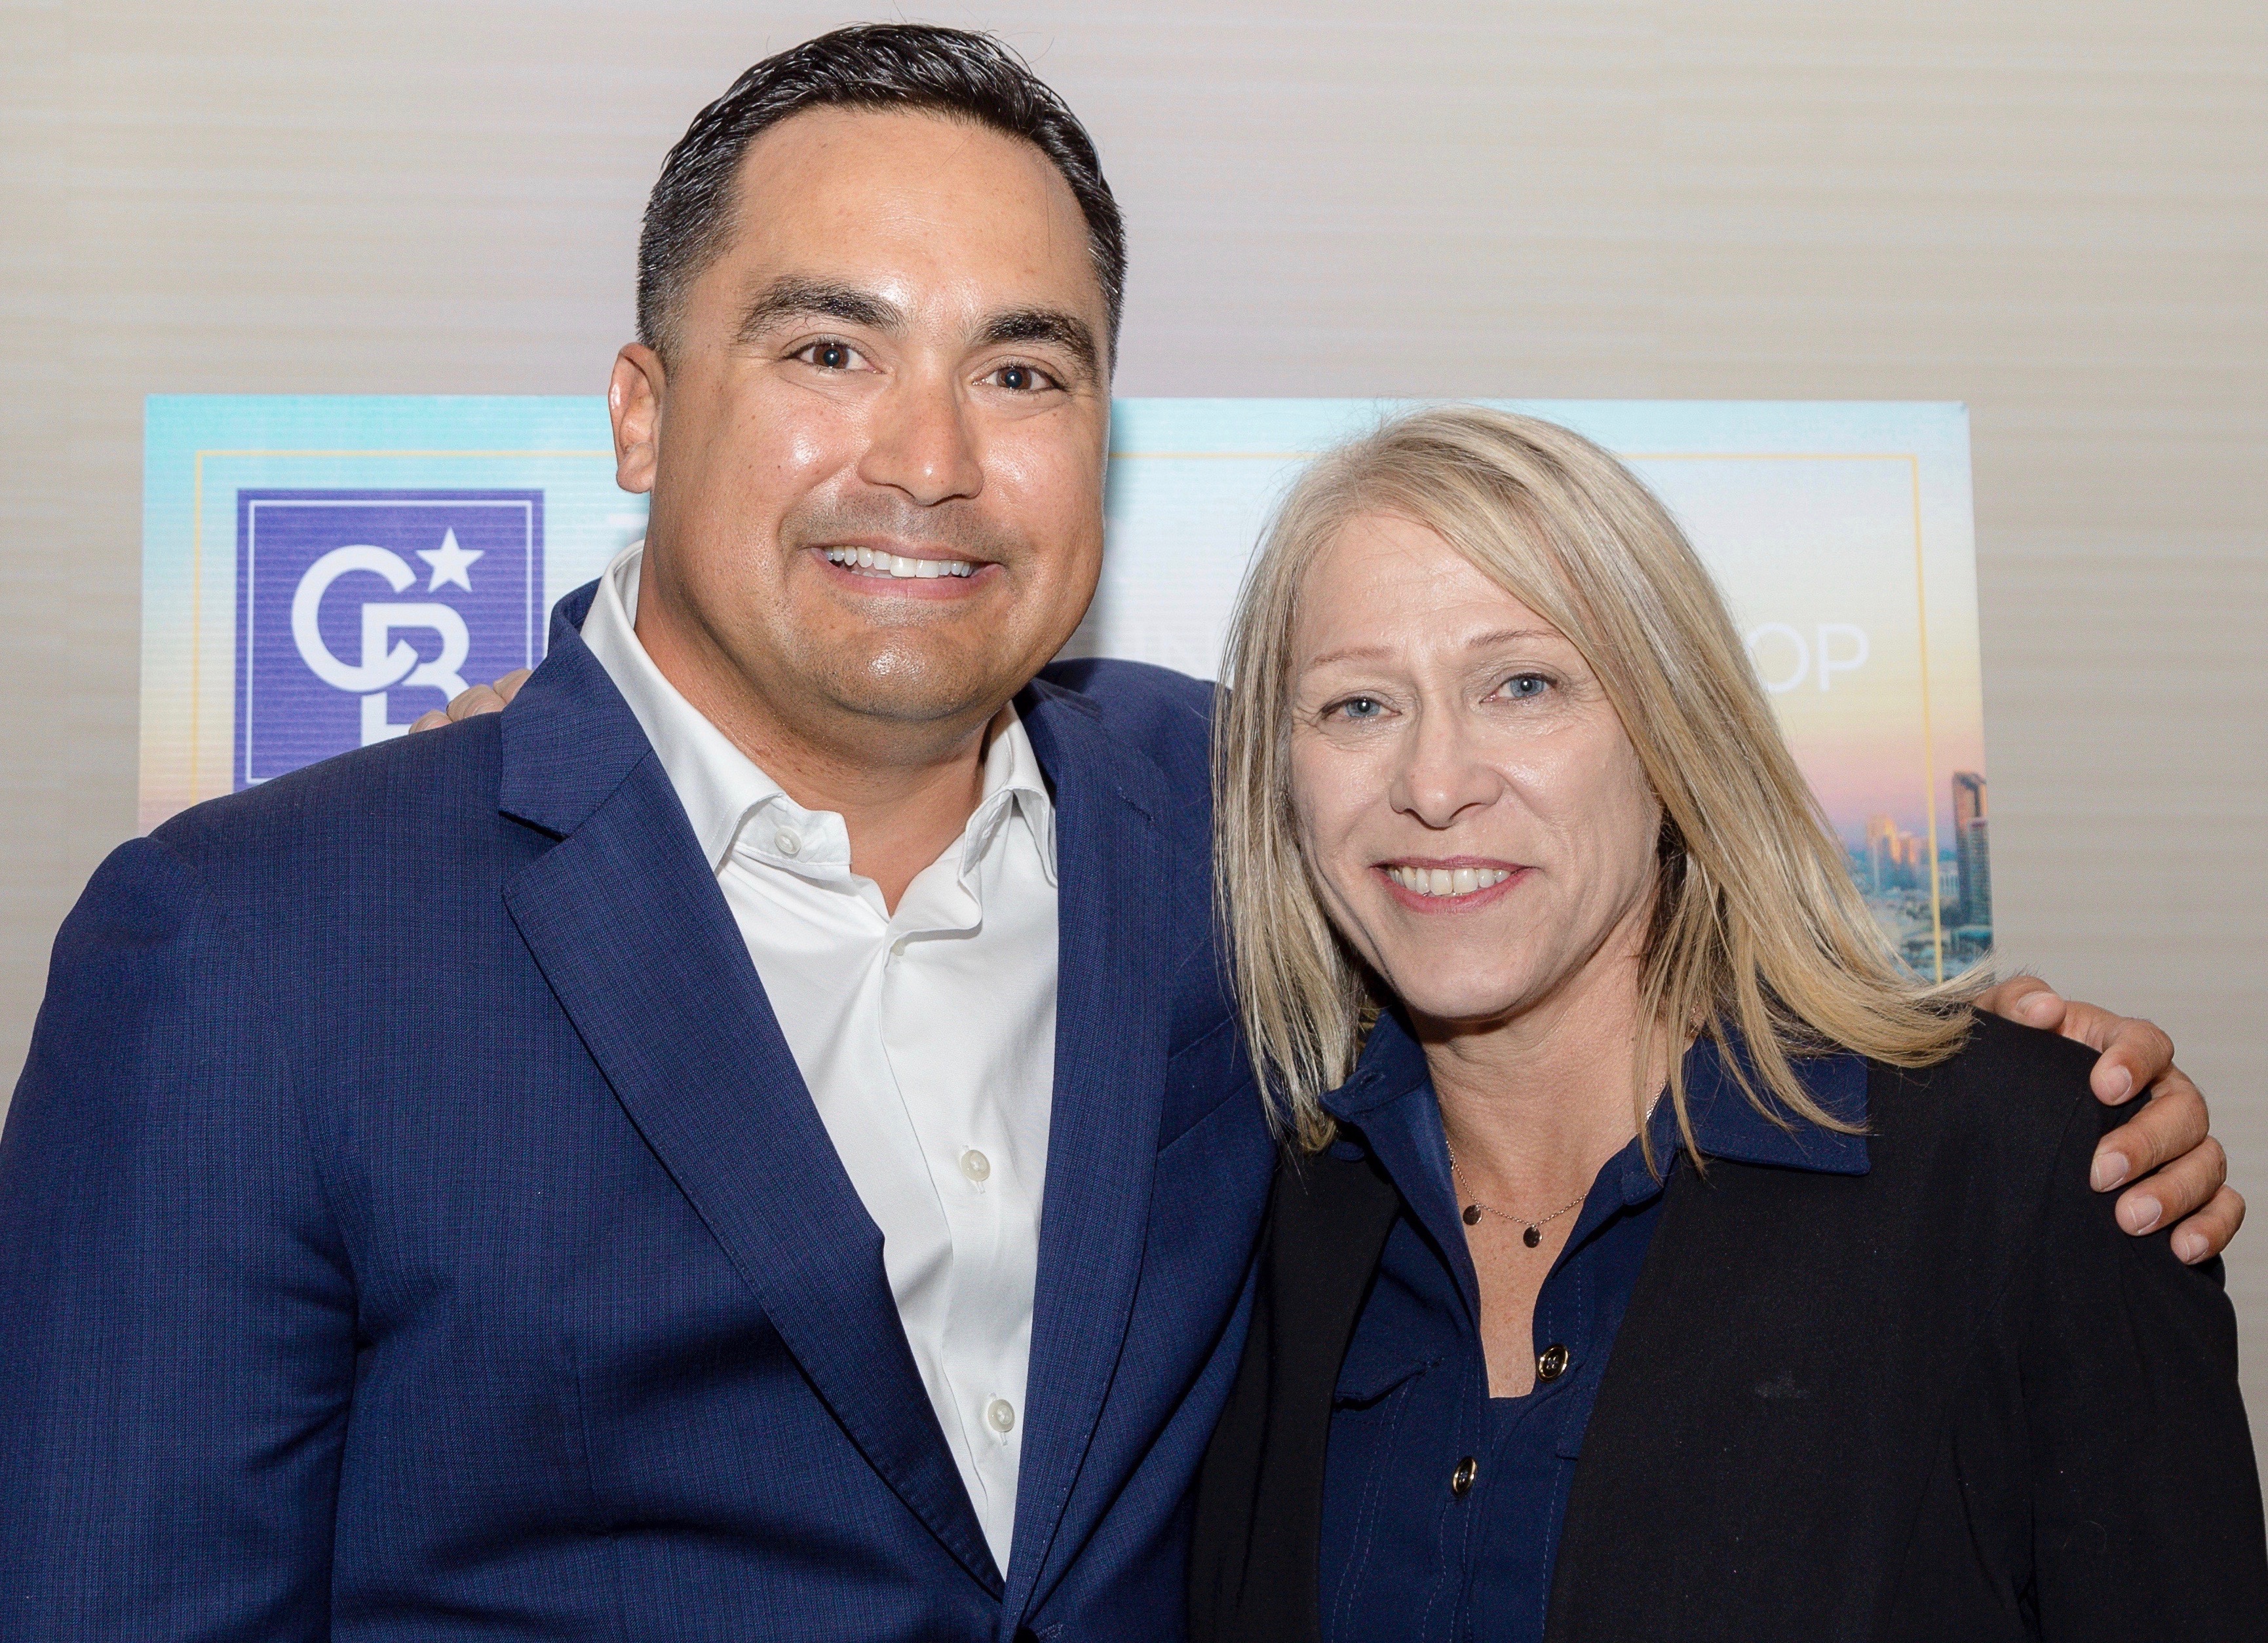 CBW President Peter Mendiola and Penny Nathan, president/CEO of Ascent Realty.